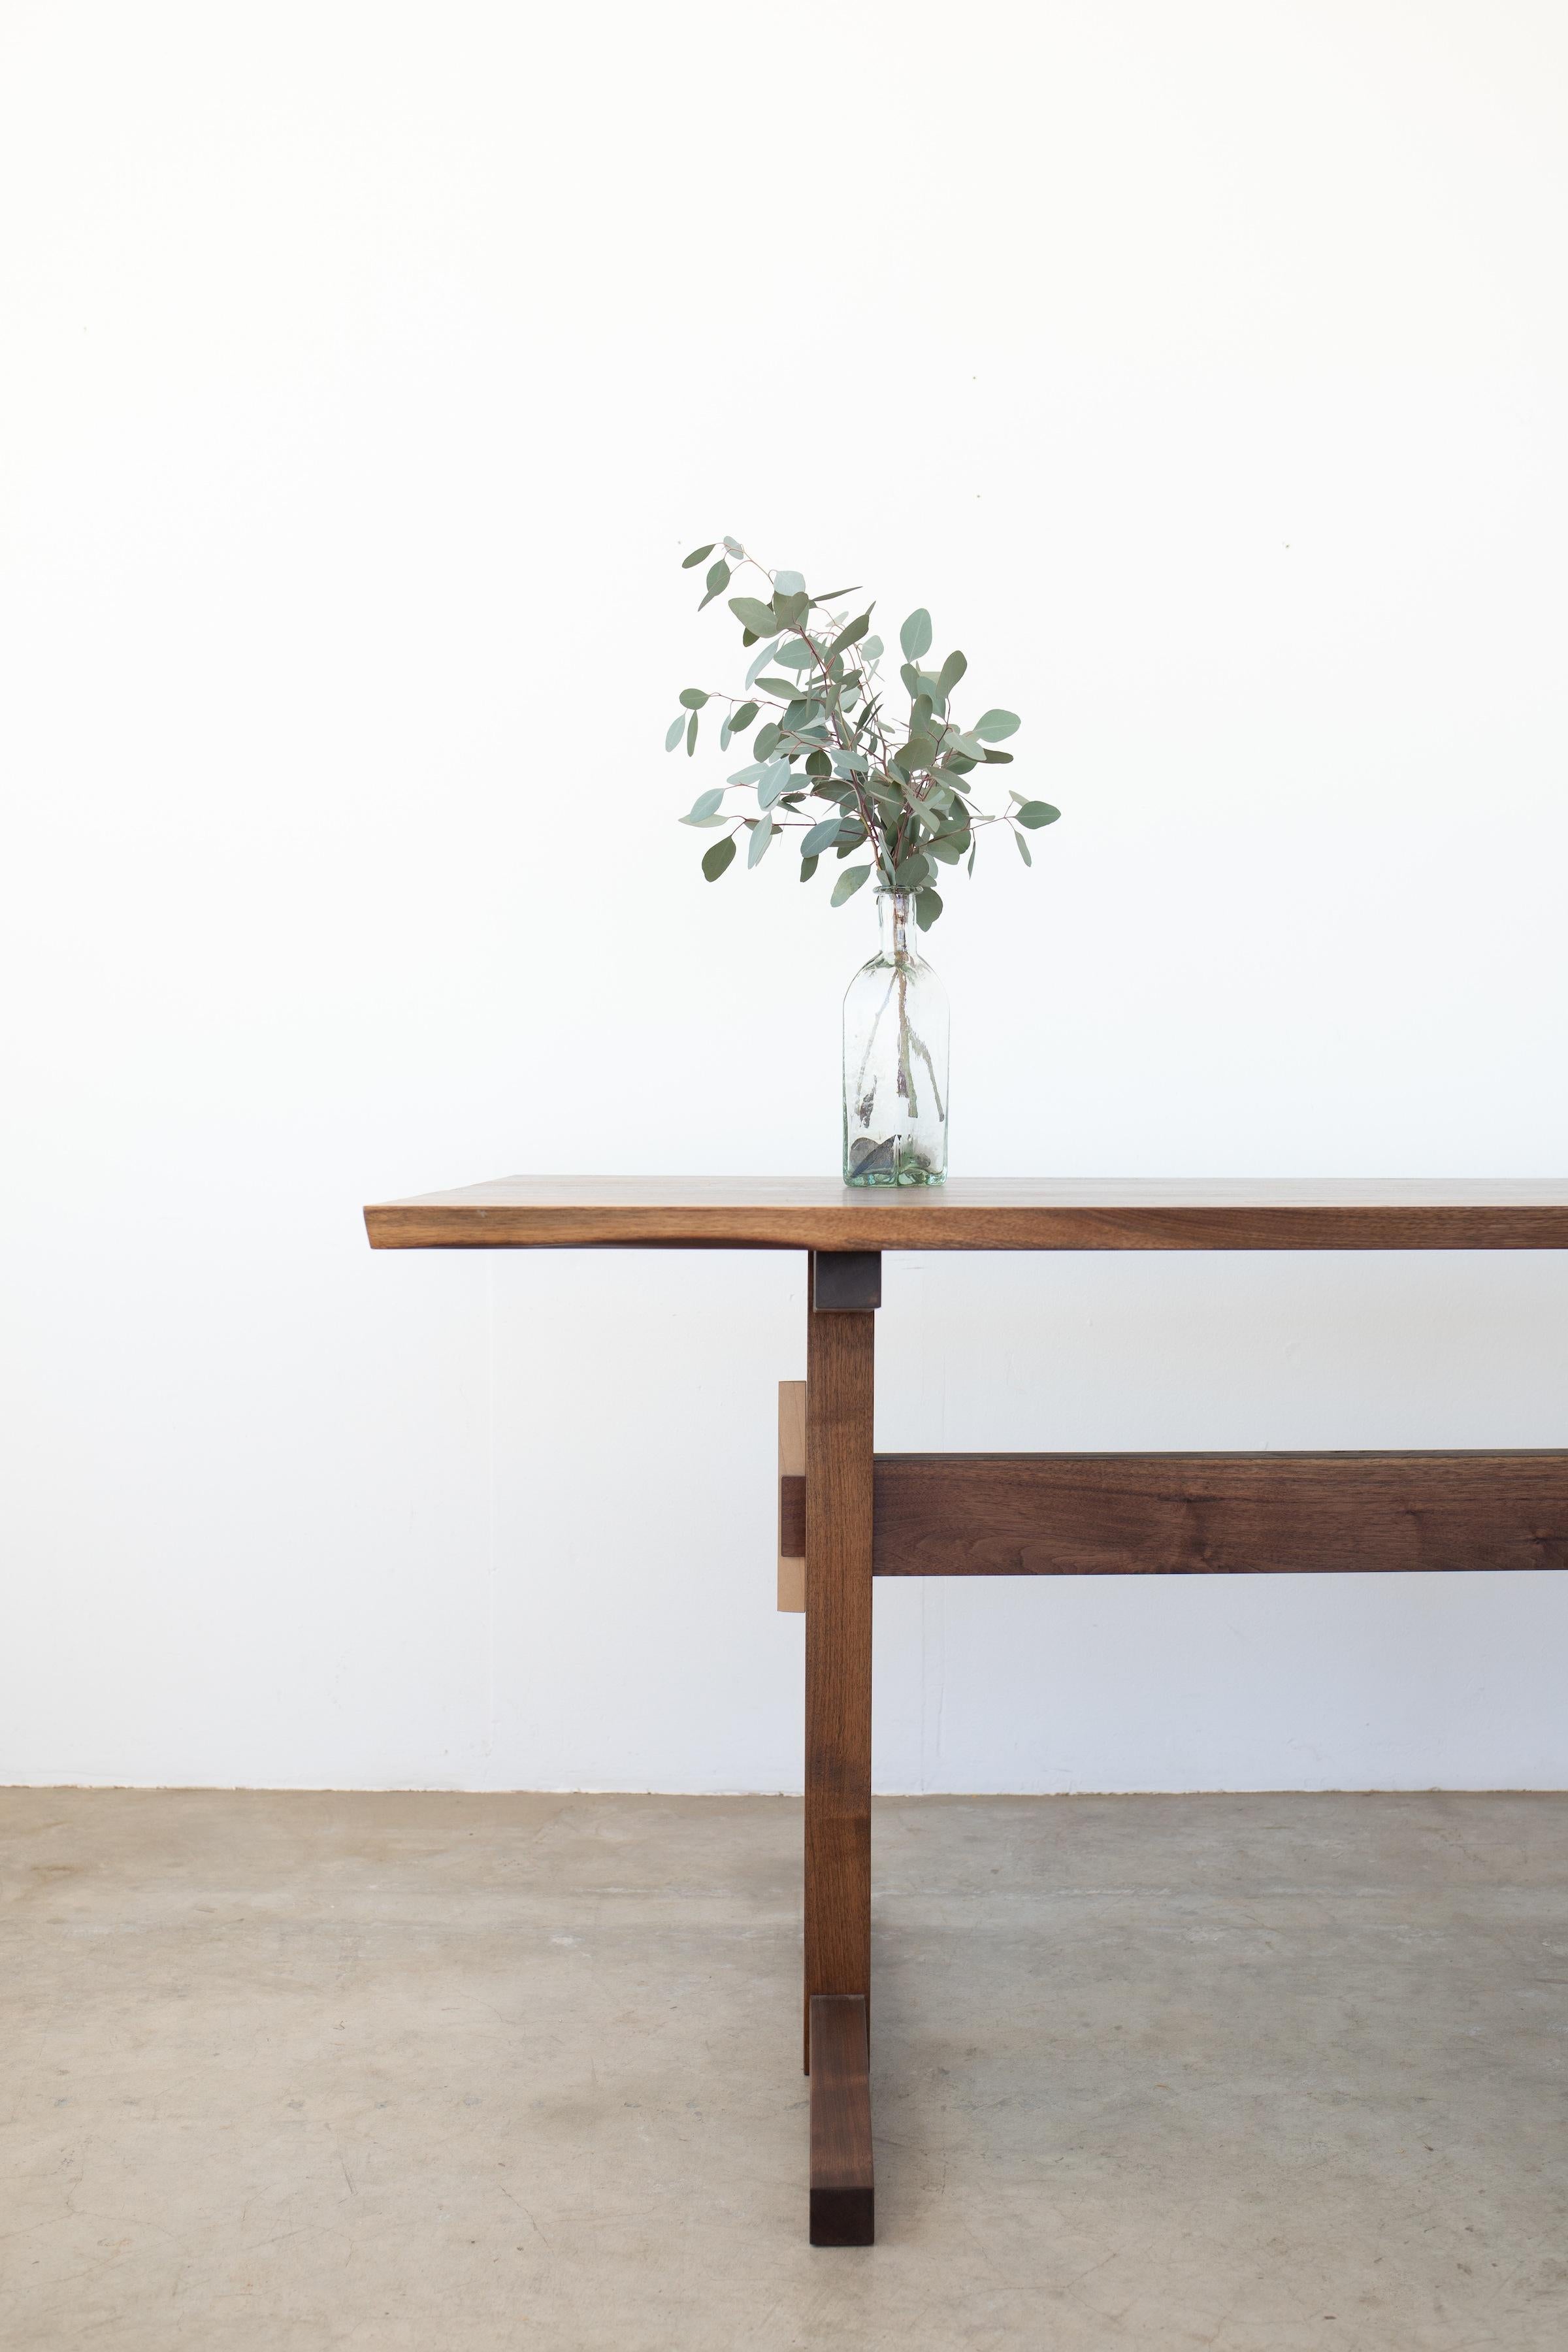 The Hana Trestle dining table is our take on the Classic trestle form, beloved by both the shakers and their distant woodworking cousins, the Japanese-who have reinterpreted the design in the most beautiful ways.

Each table begins with scrupulously